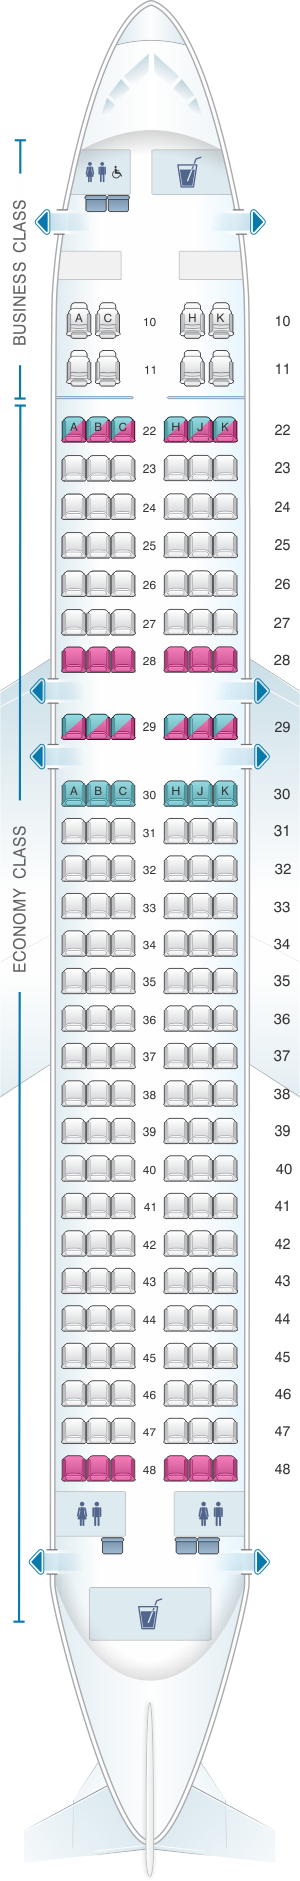 Seat map for Cathay Dragon Airbus A320 200